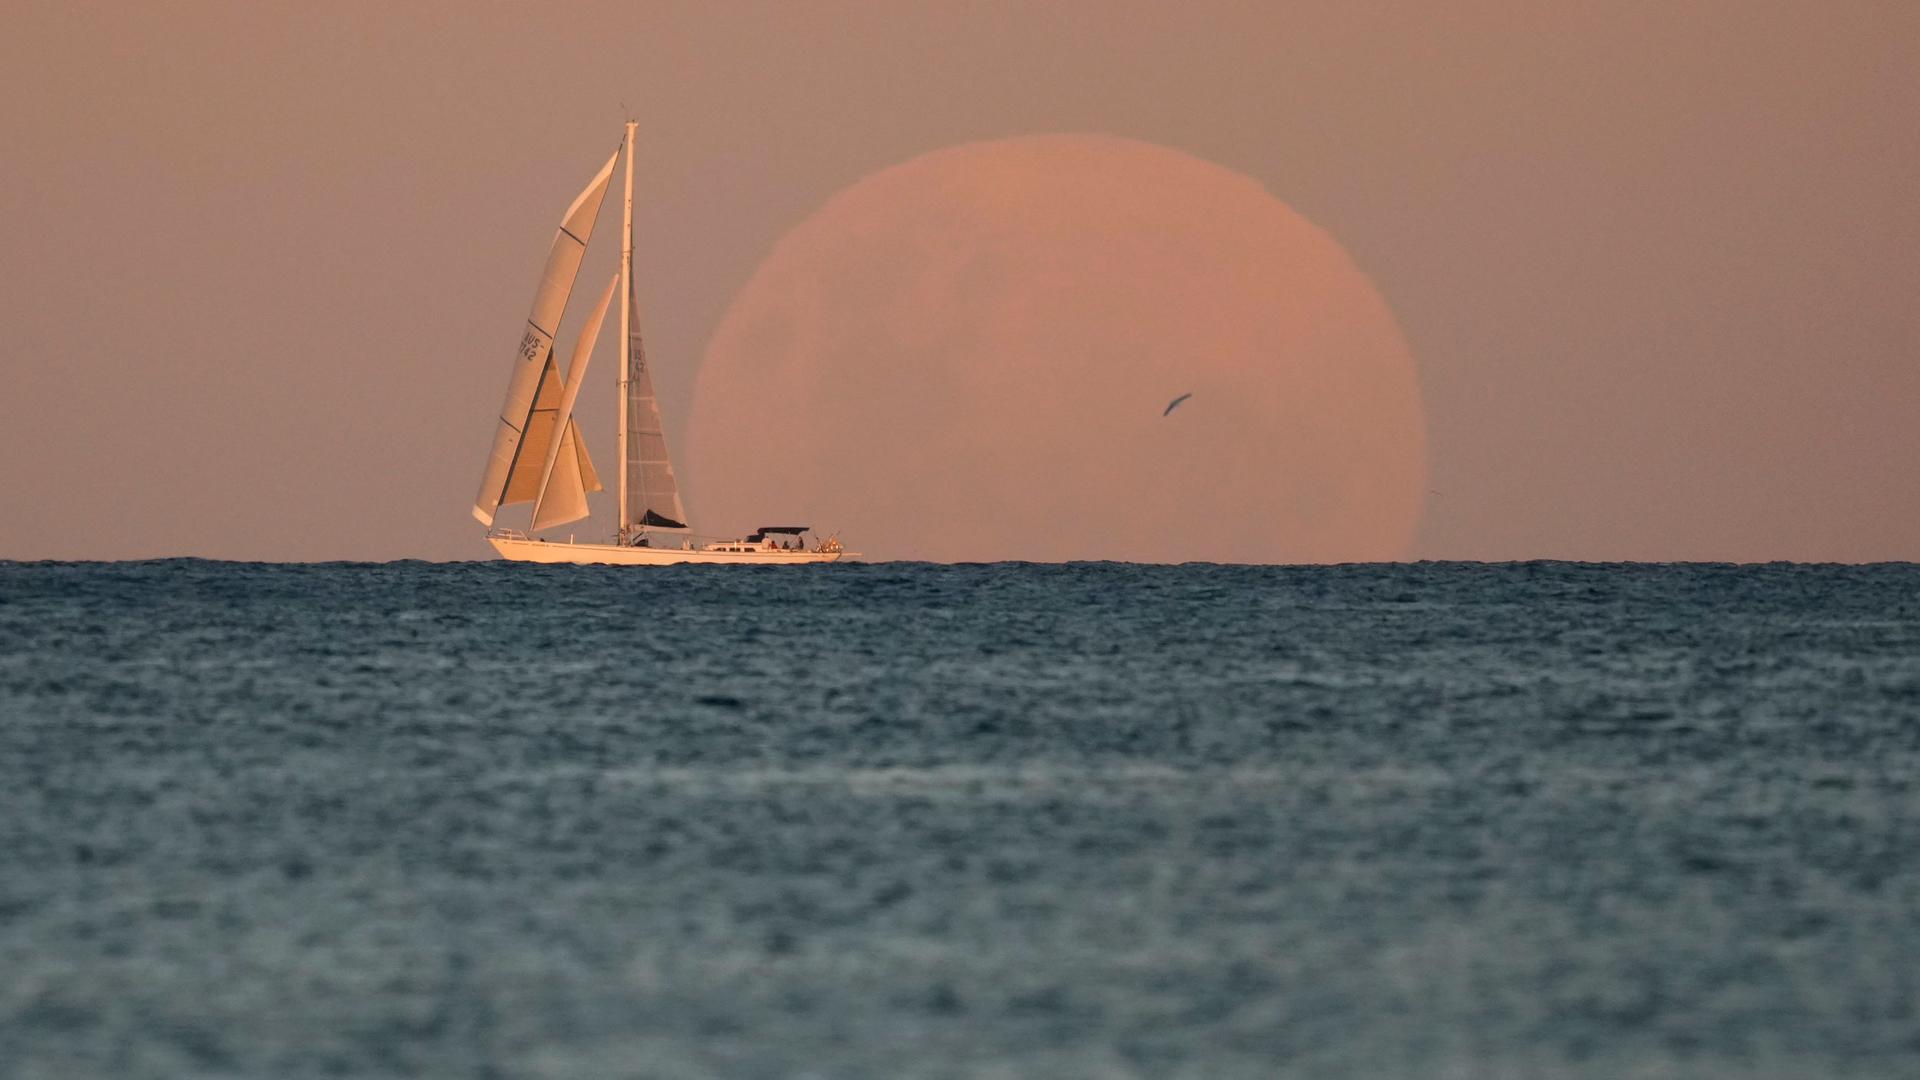 A boat with its sails up is shown at the horizon line during golden hour as a large orange moon is shown behind it.